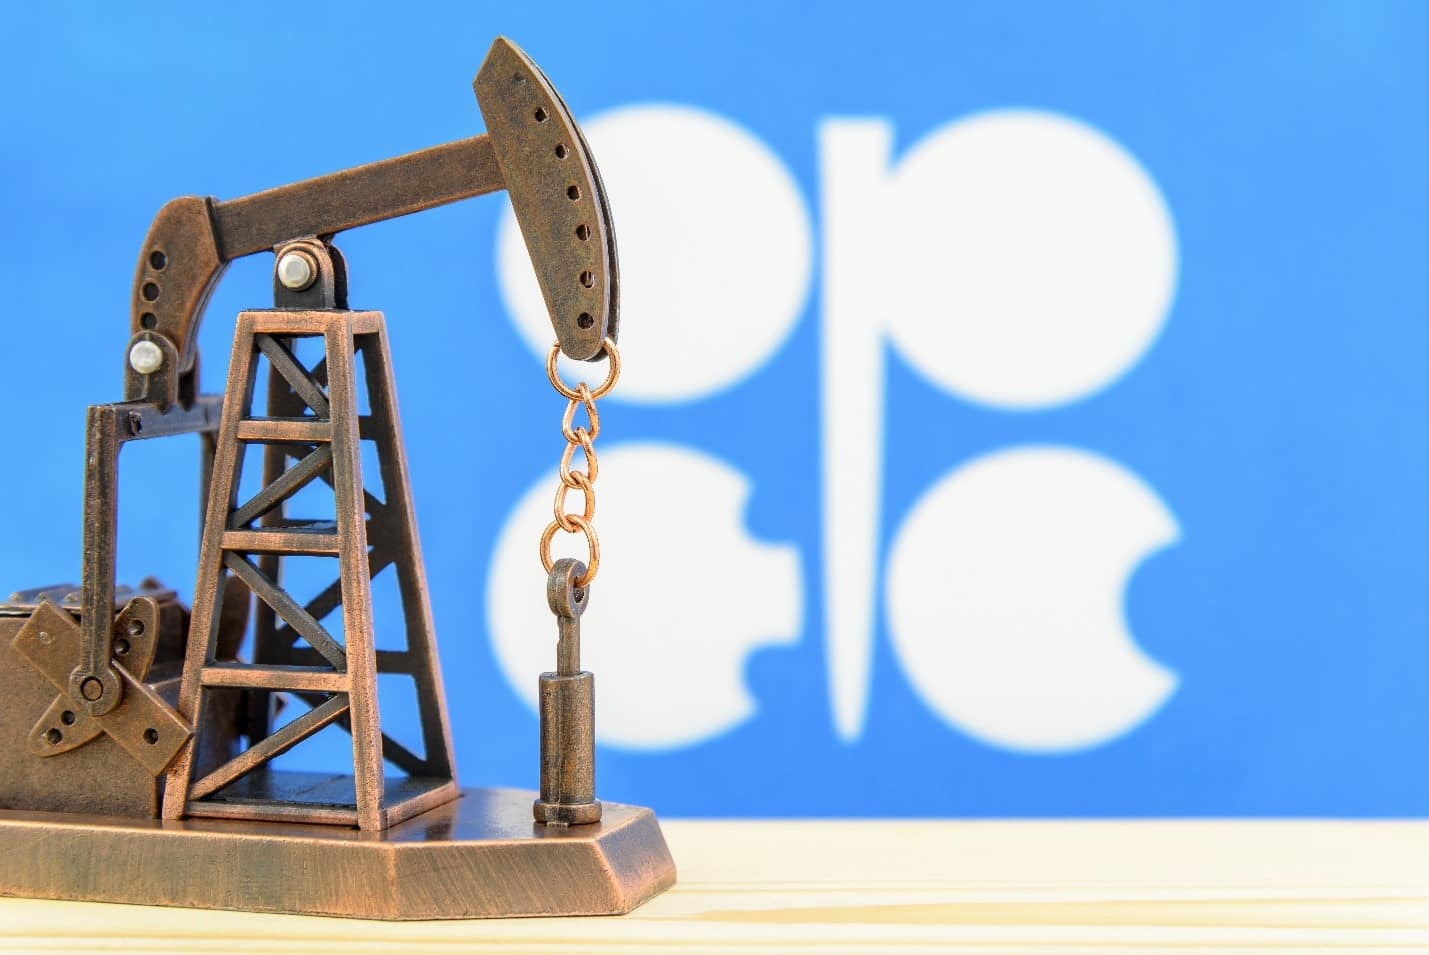 Price rise in Saudi Arabia in July outperforms OPEC+ agreement